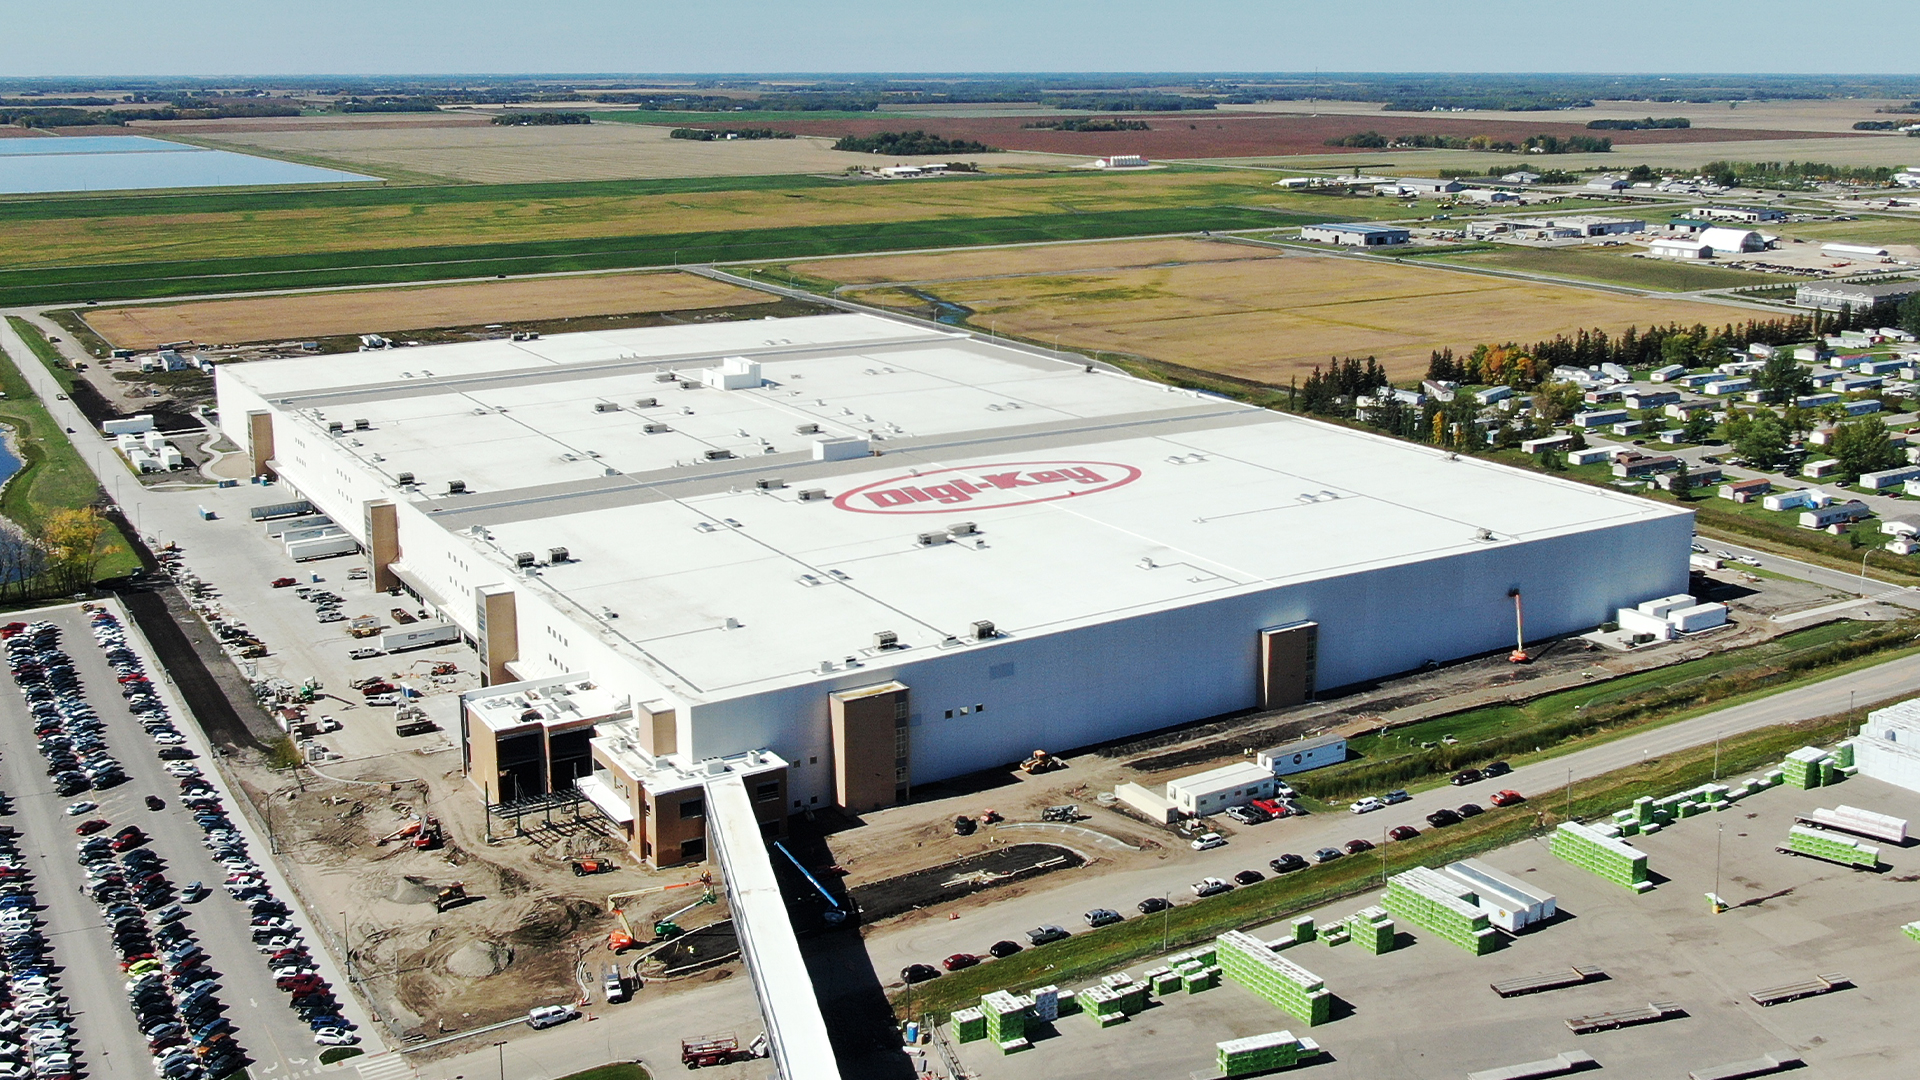 Aerial view of the Digi-Key Product Distribution Center Expansion